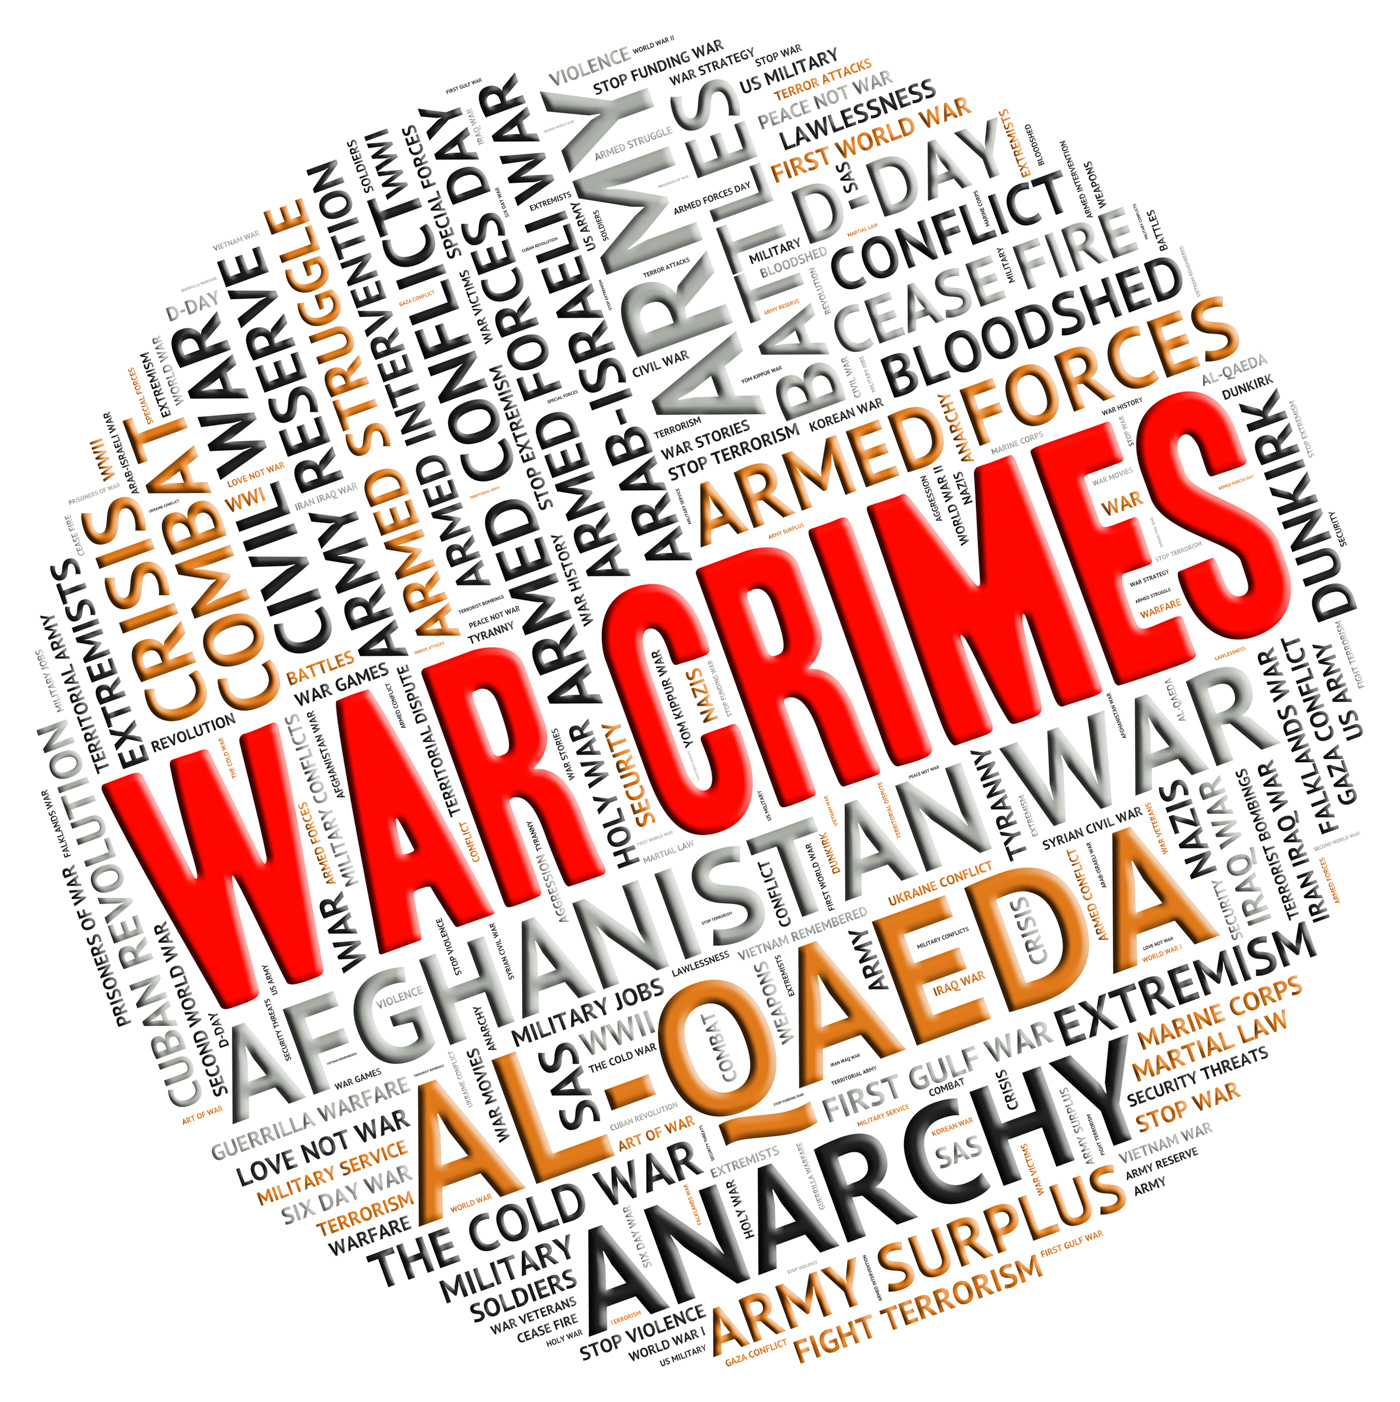 War crimes indicates military action and clash photo